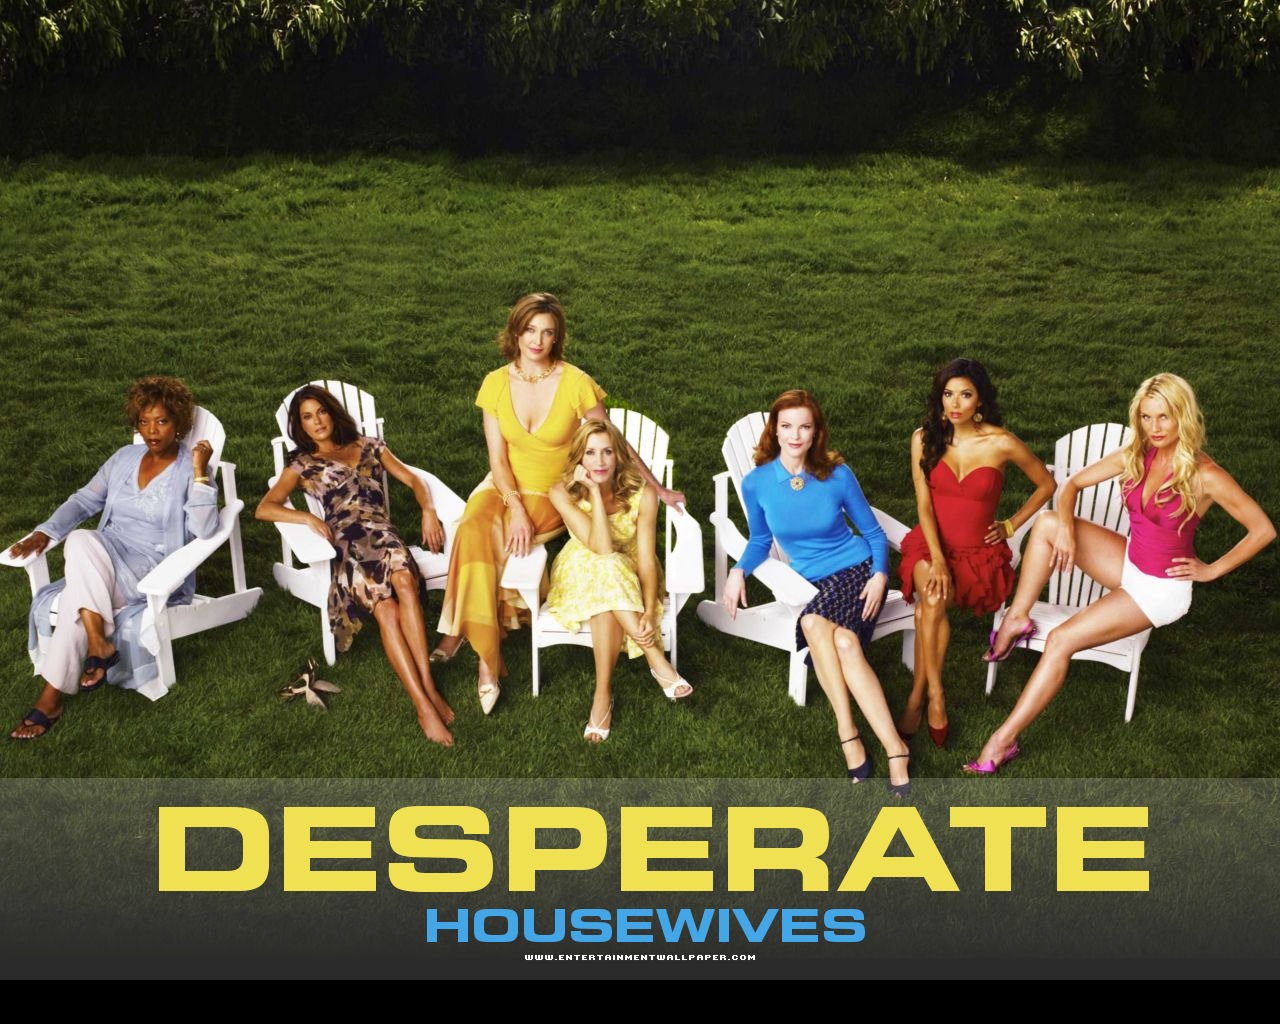 Desperate Housewives 絕望的主婦 #37 - 1280x1024